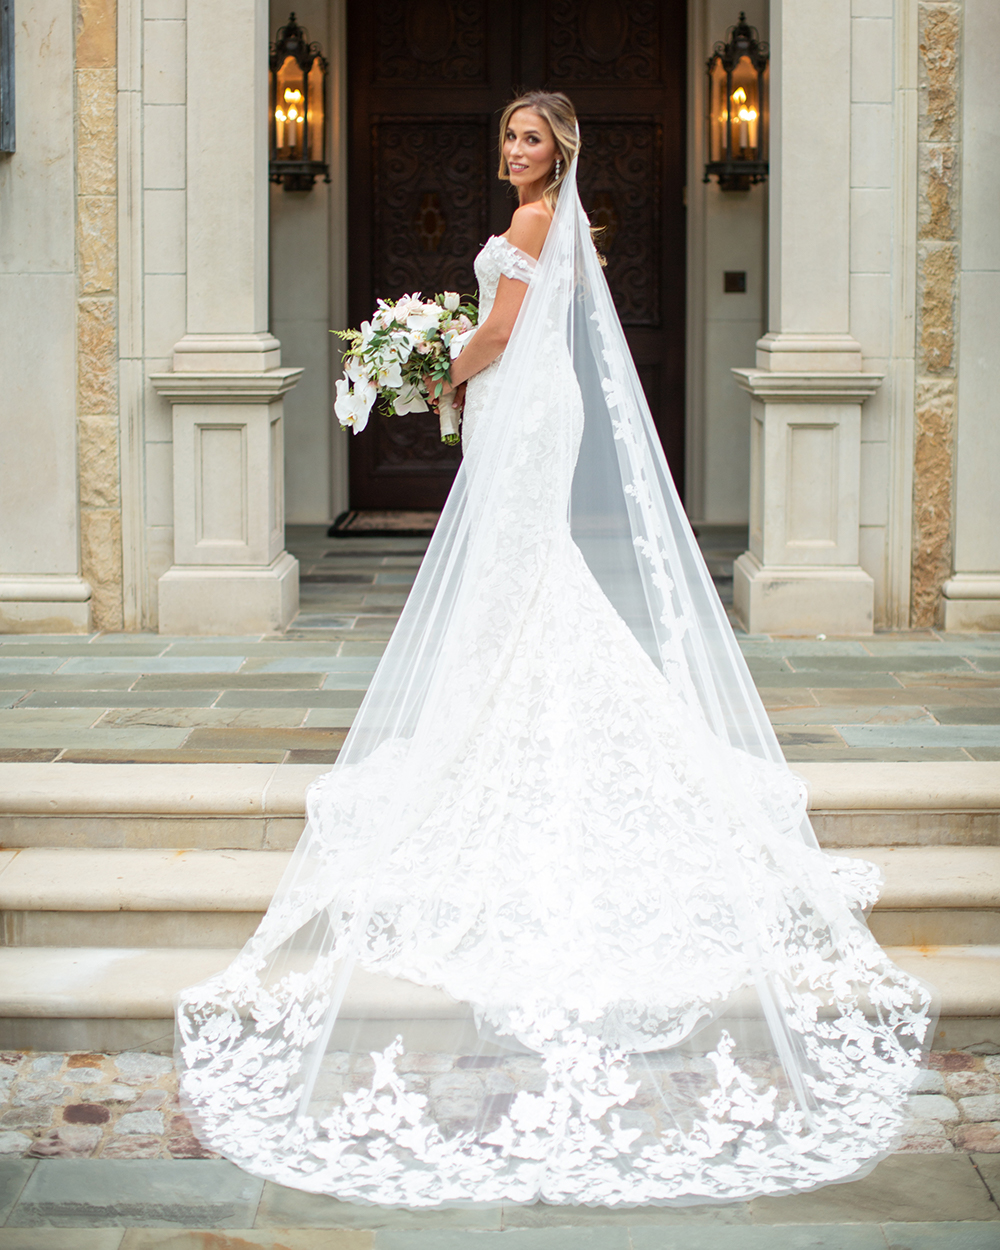 All About the Wedding Veil